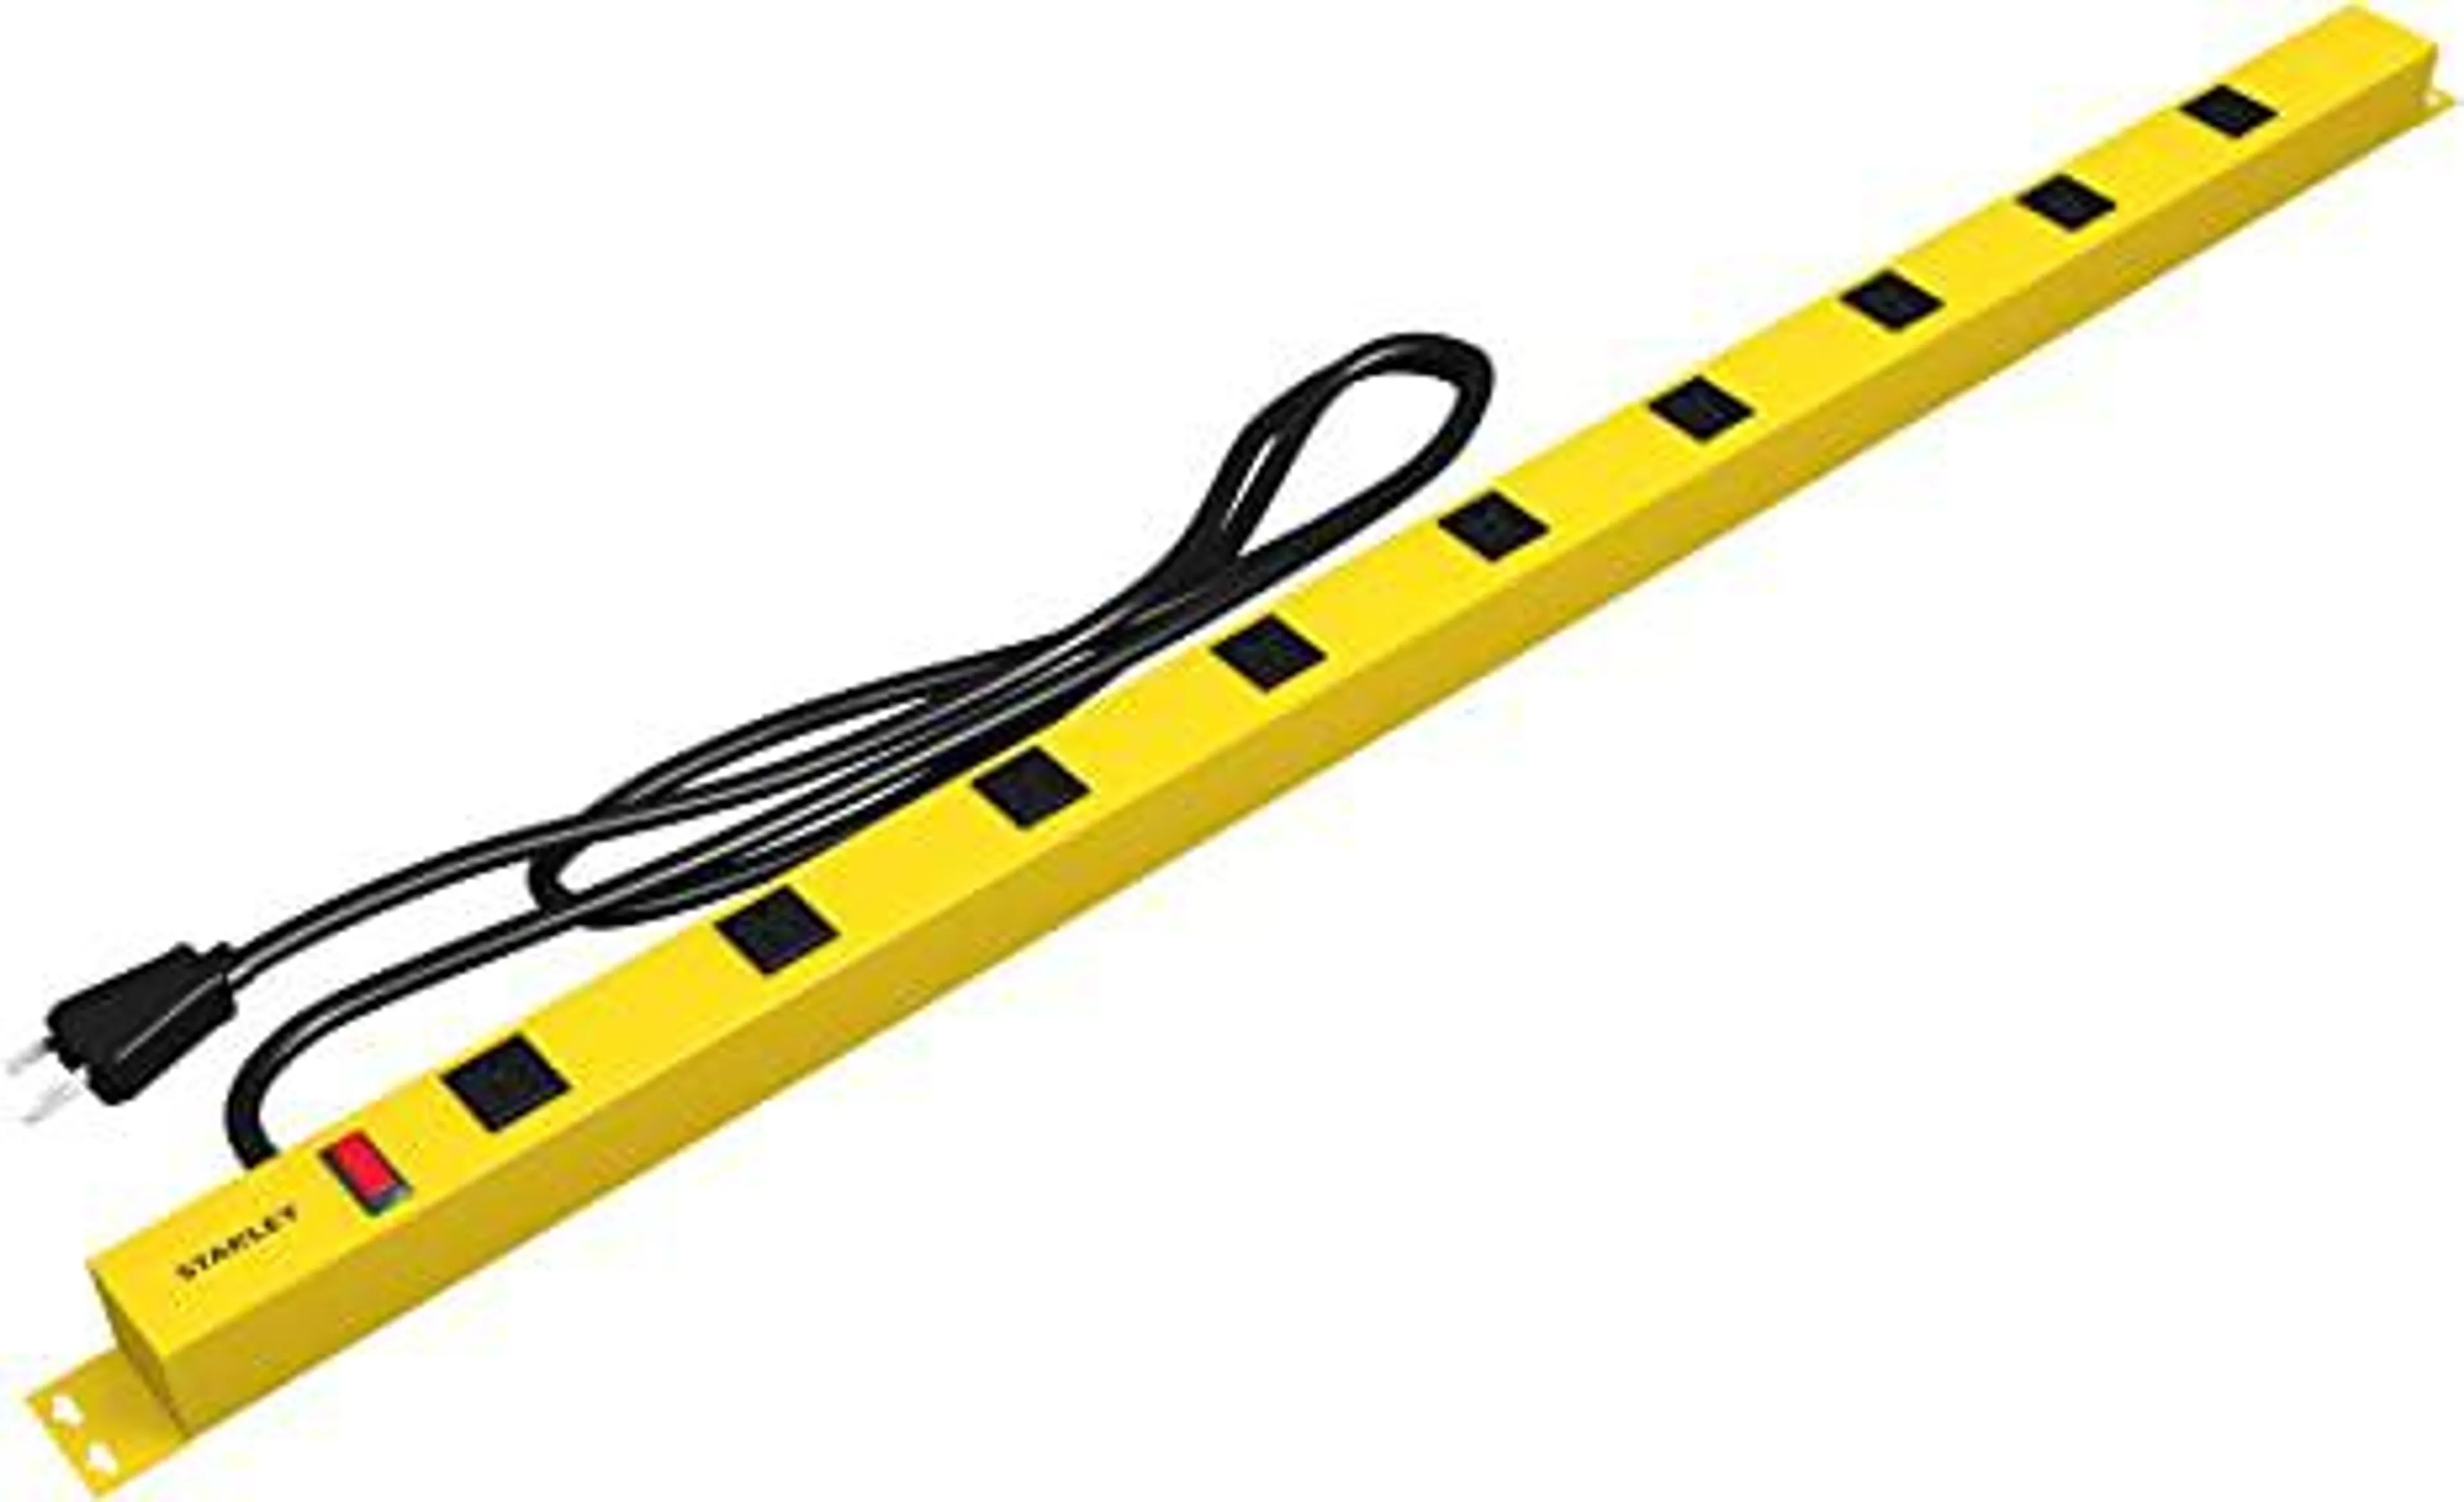 Stanley 31615 NCC31615 ShopMAX Pro 9-Outlet Surge-Protector Power Bar, 6-Foot Cord, Yellow